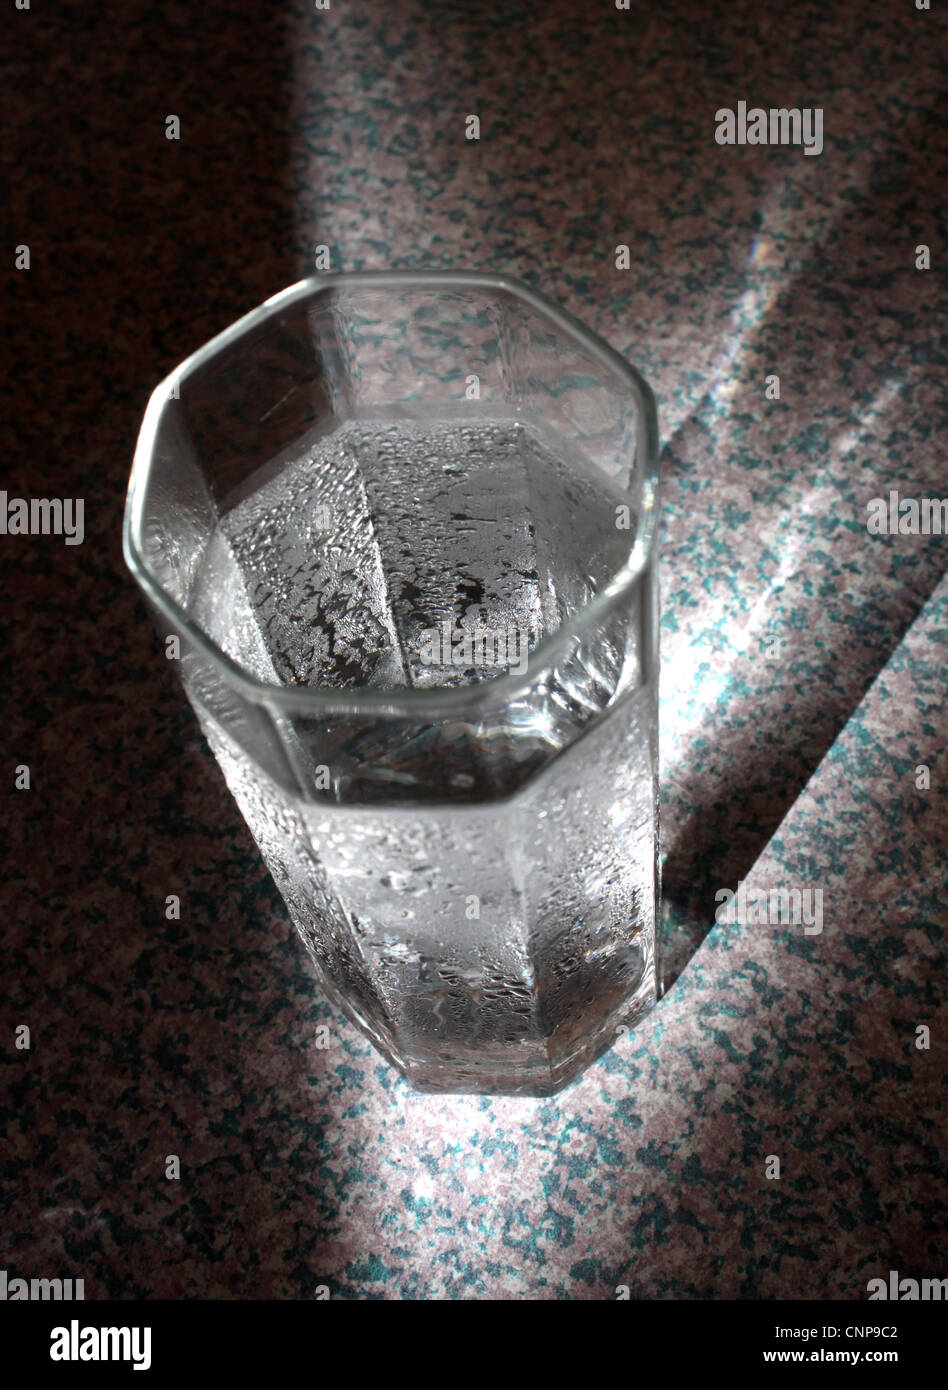 Chilled drinking water in a drinking glass Stock Photo